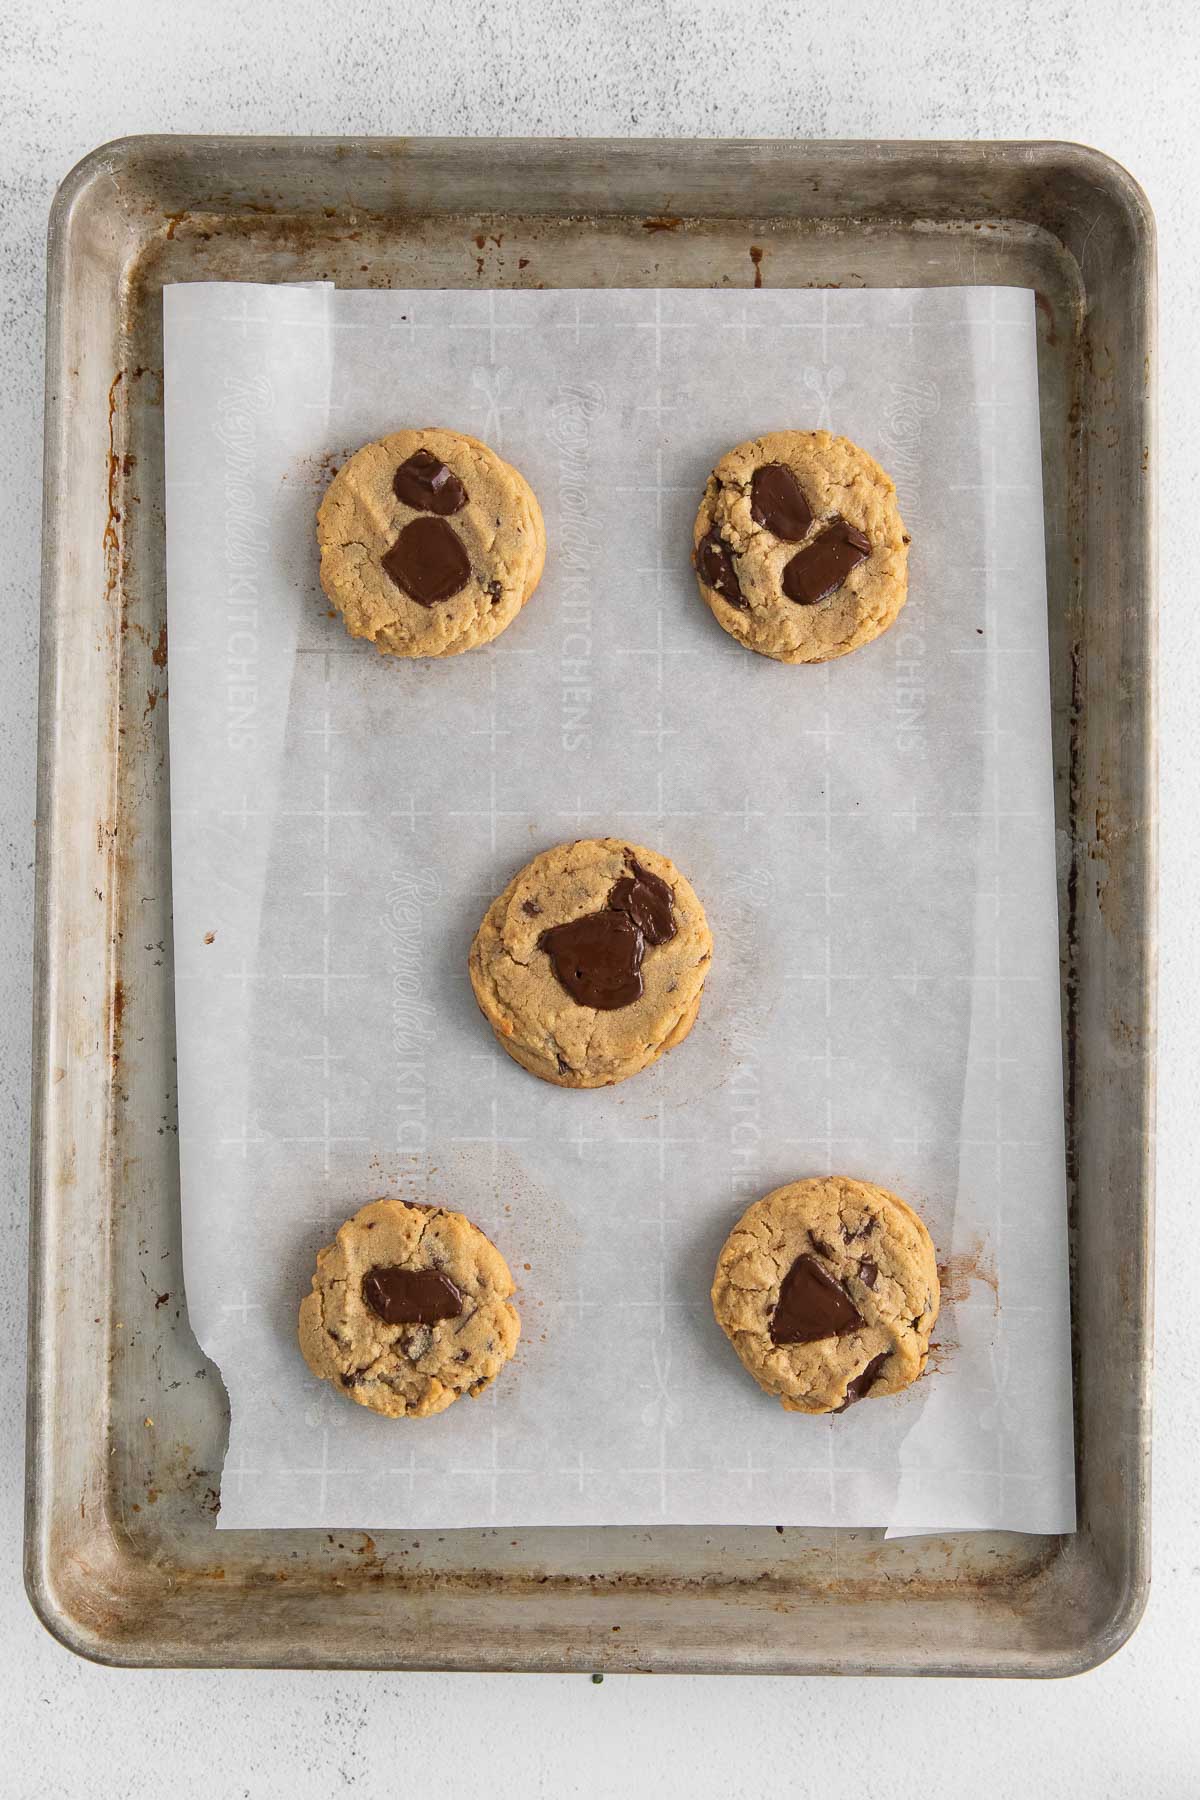 five baked peanut butter and chocolate chip cookies on a baking tray